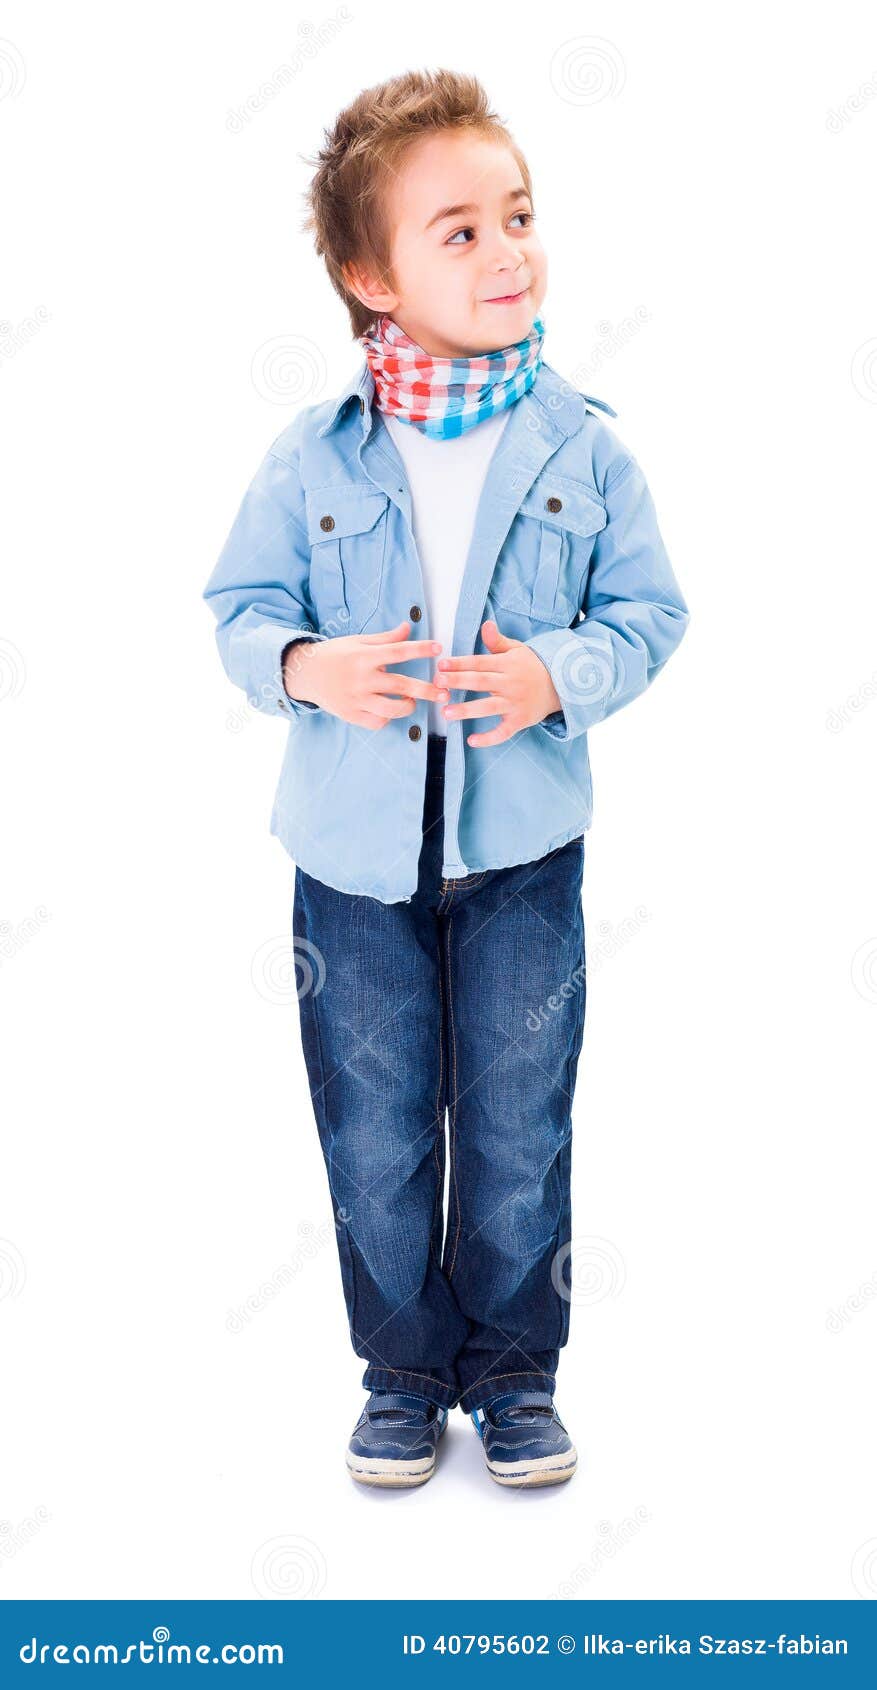 Cute young boy thinking stock photo. Image of little - 40795602